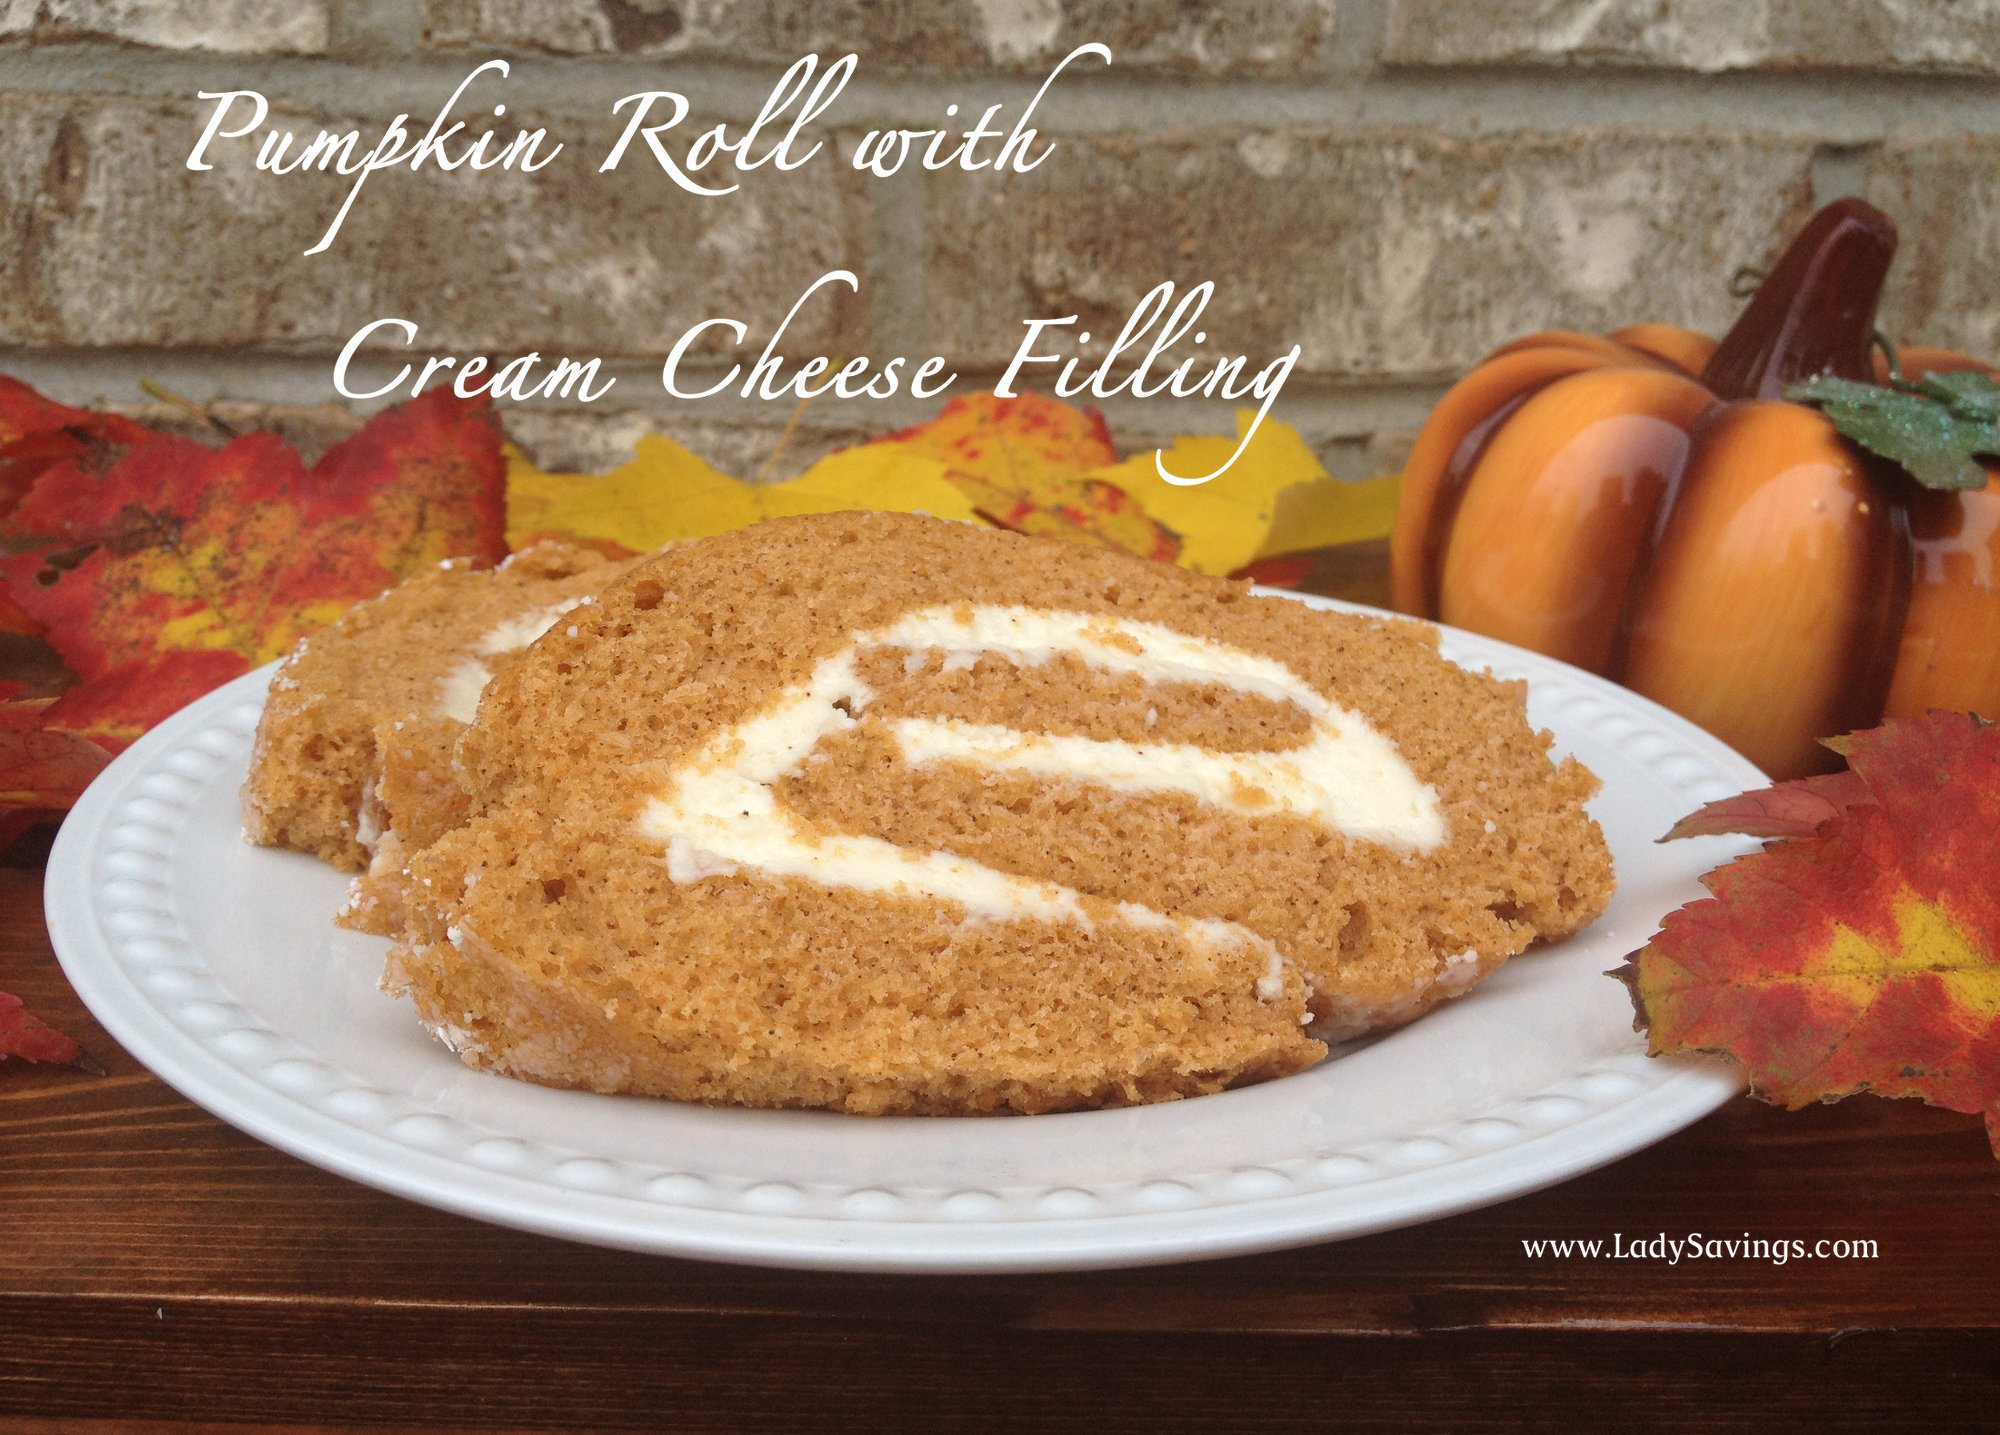 Pumpkin Roll with Cream Cheese Filling Recipe